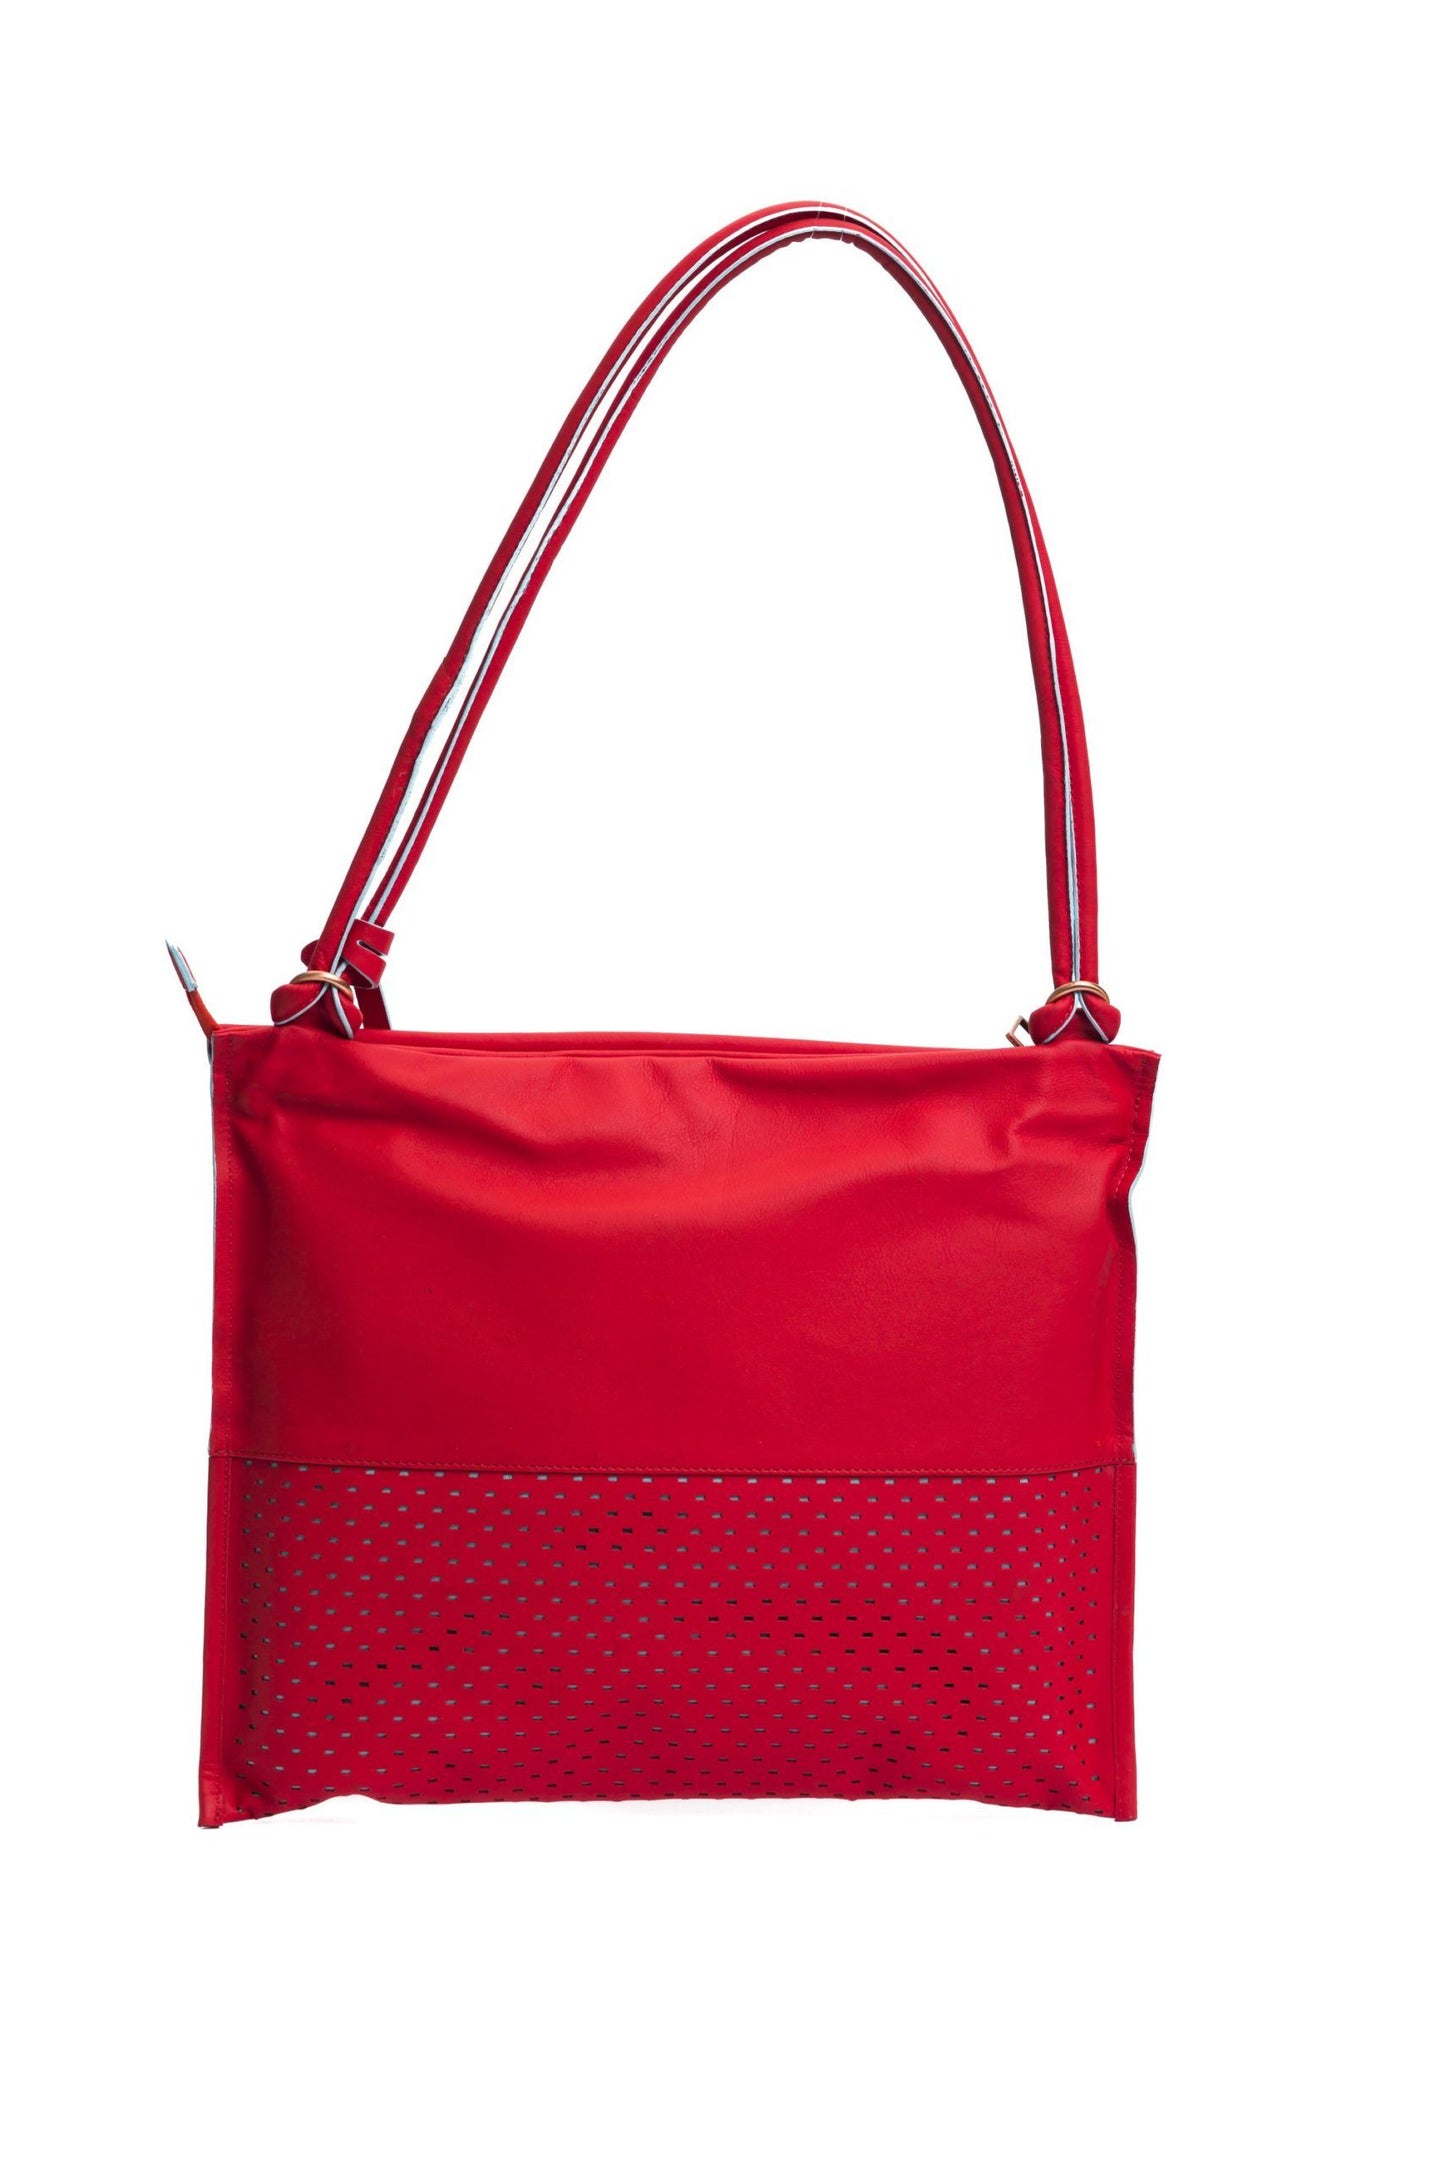 Chic Perforated Red Leather Shoulder Bag